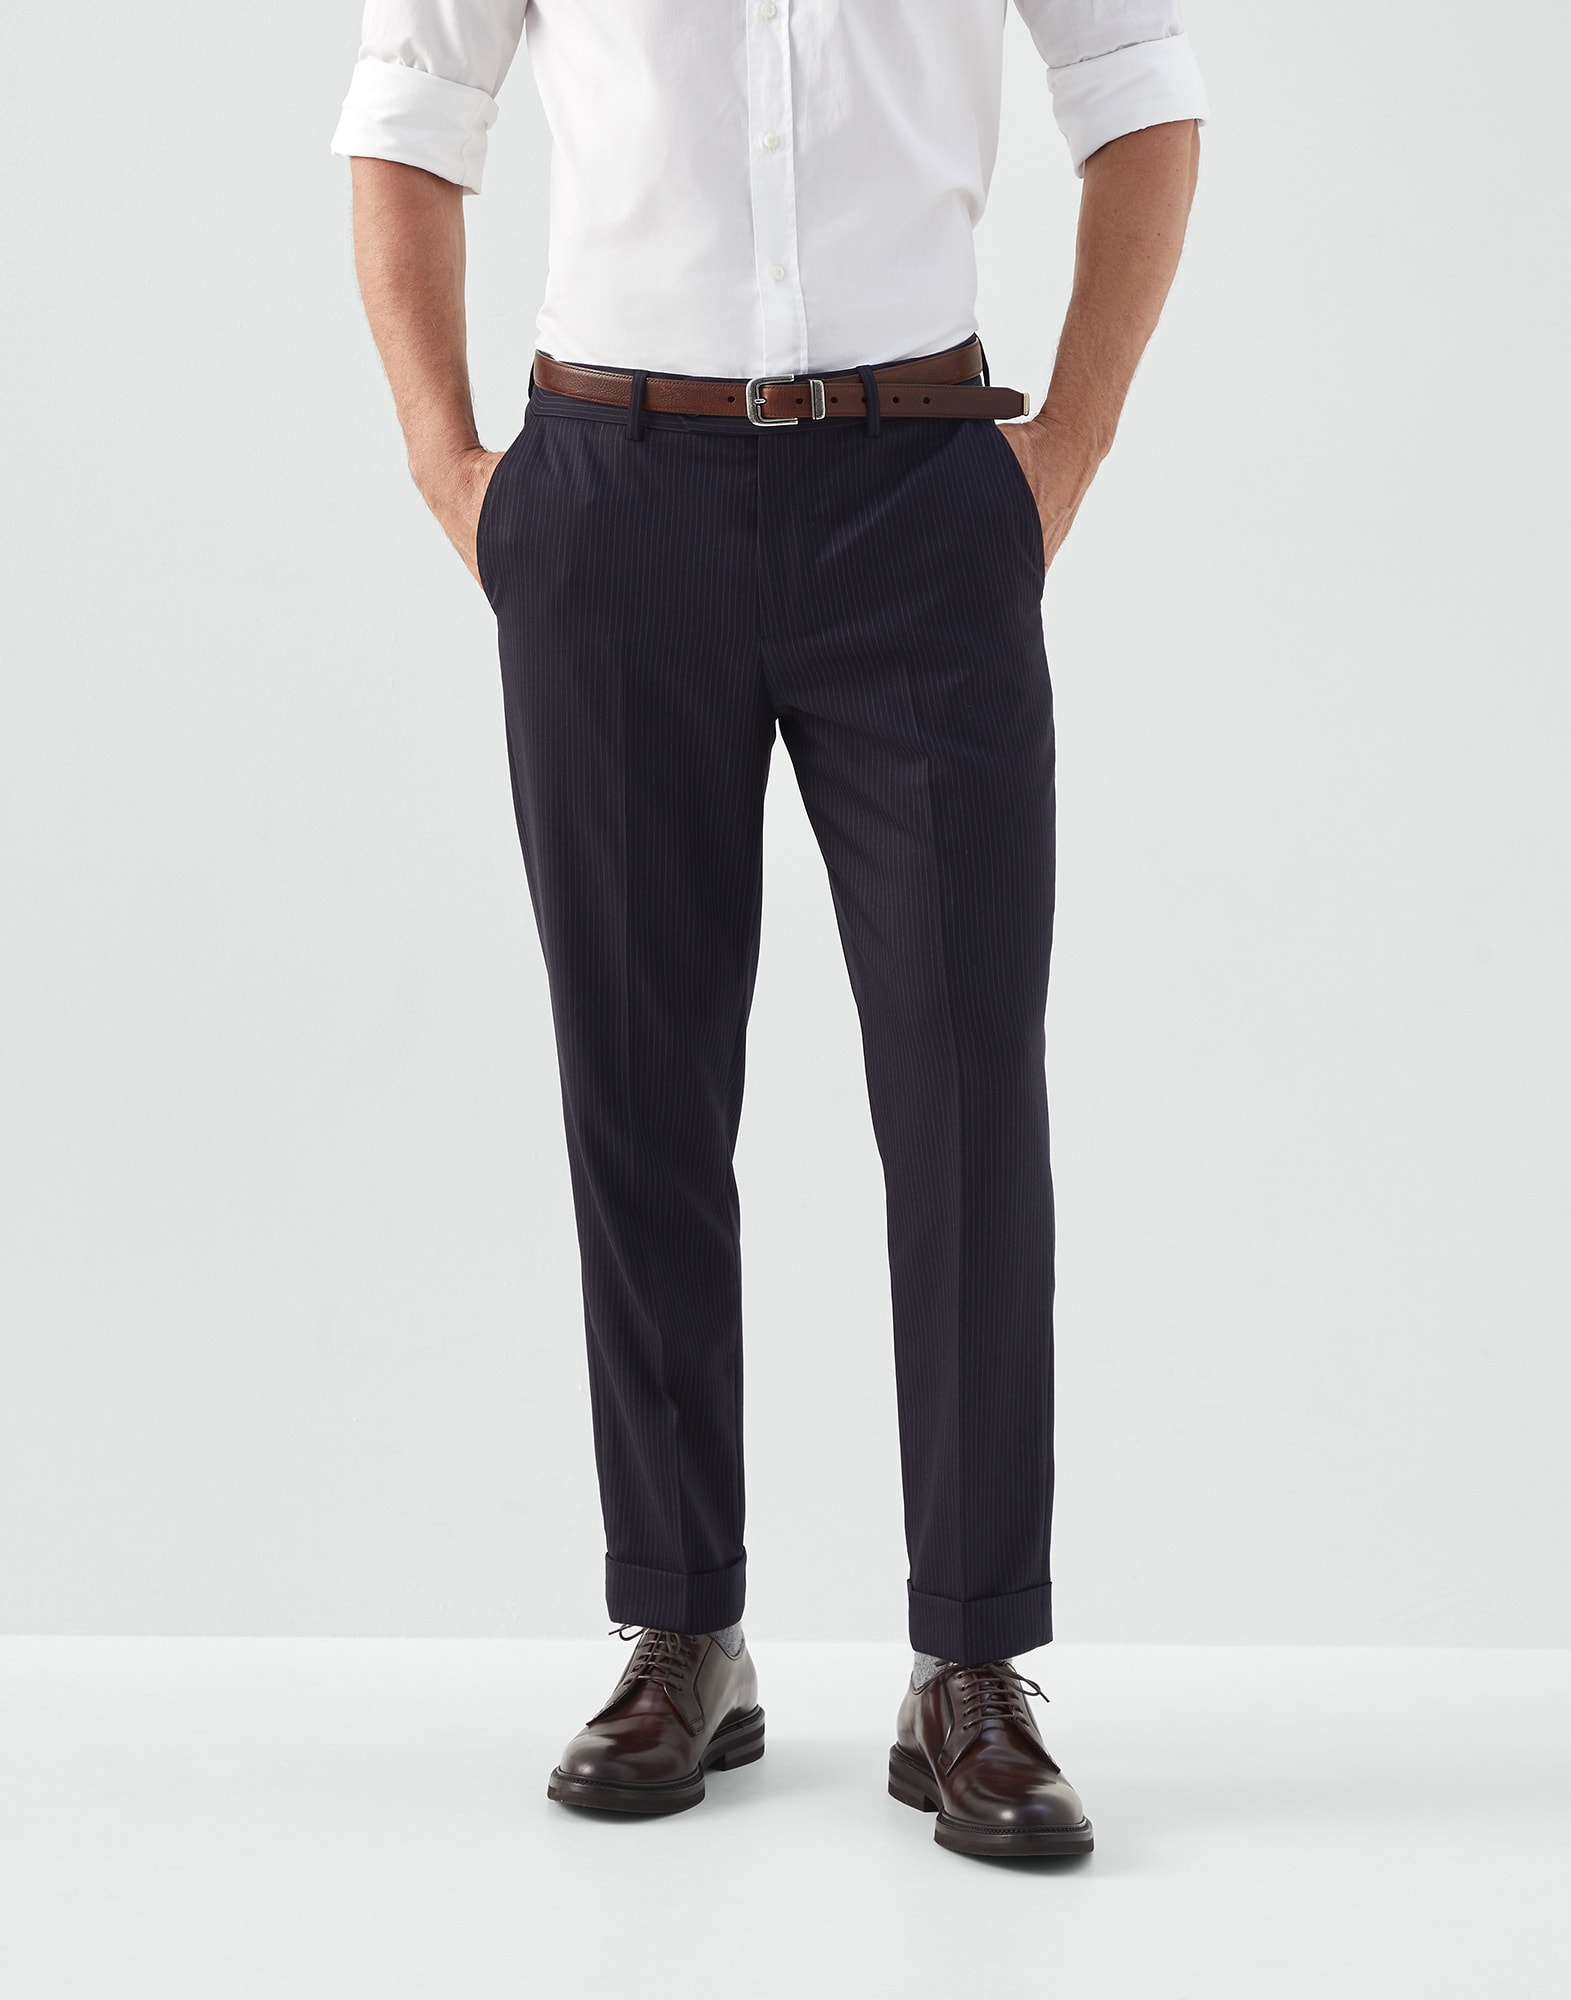 Cotton Casual,Party Wear Men Ankle Length Trouser, Regular Fit at Rs 1499  in Ahmedabad